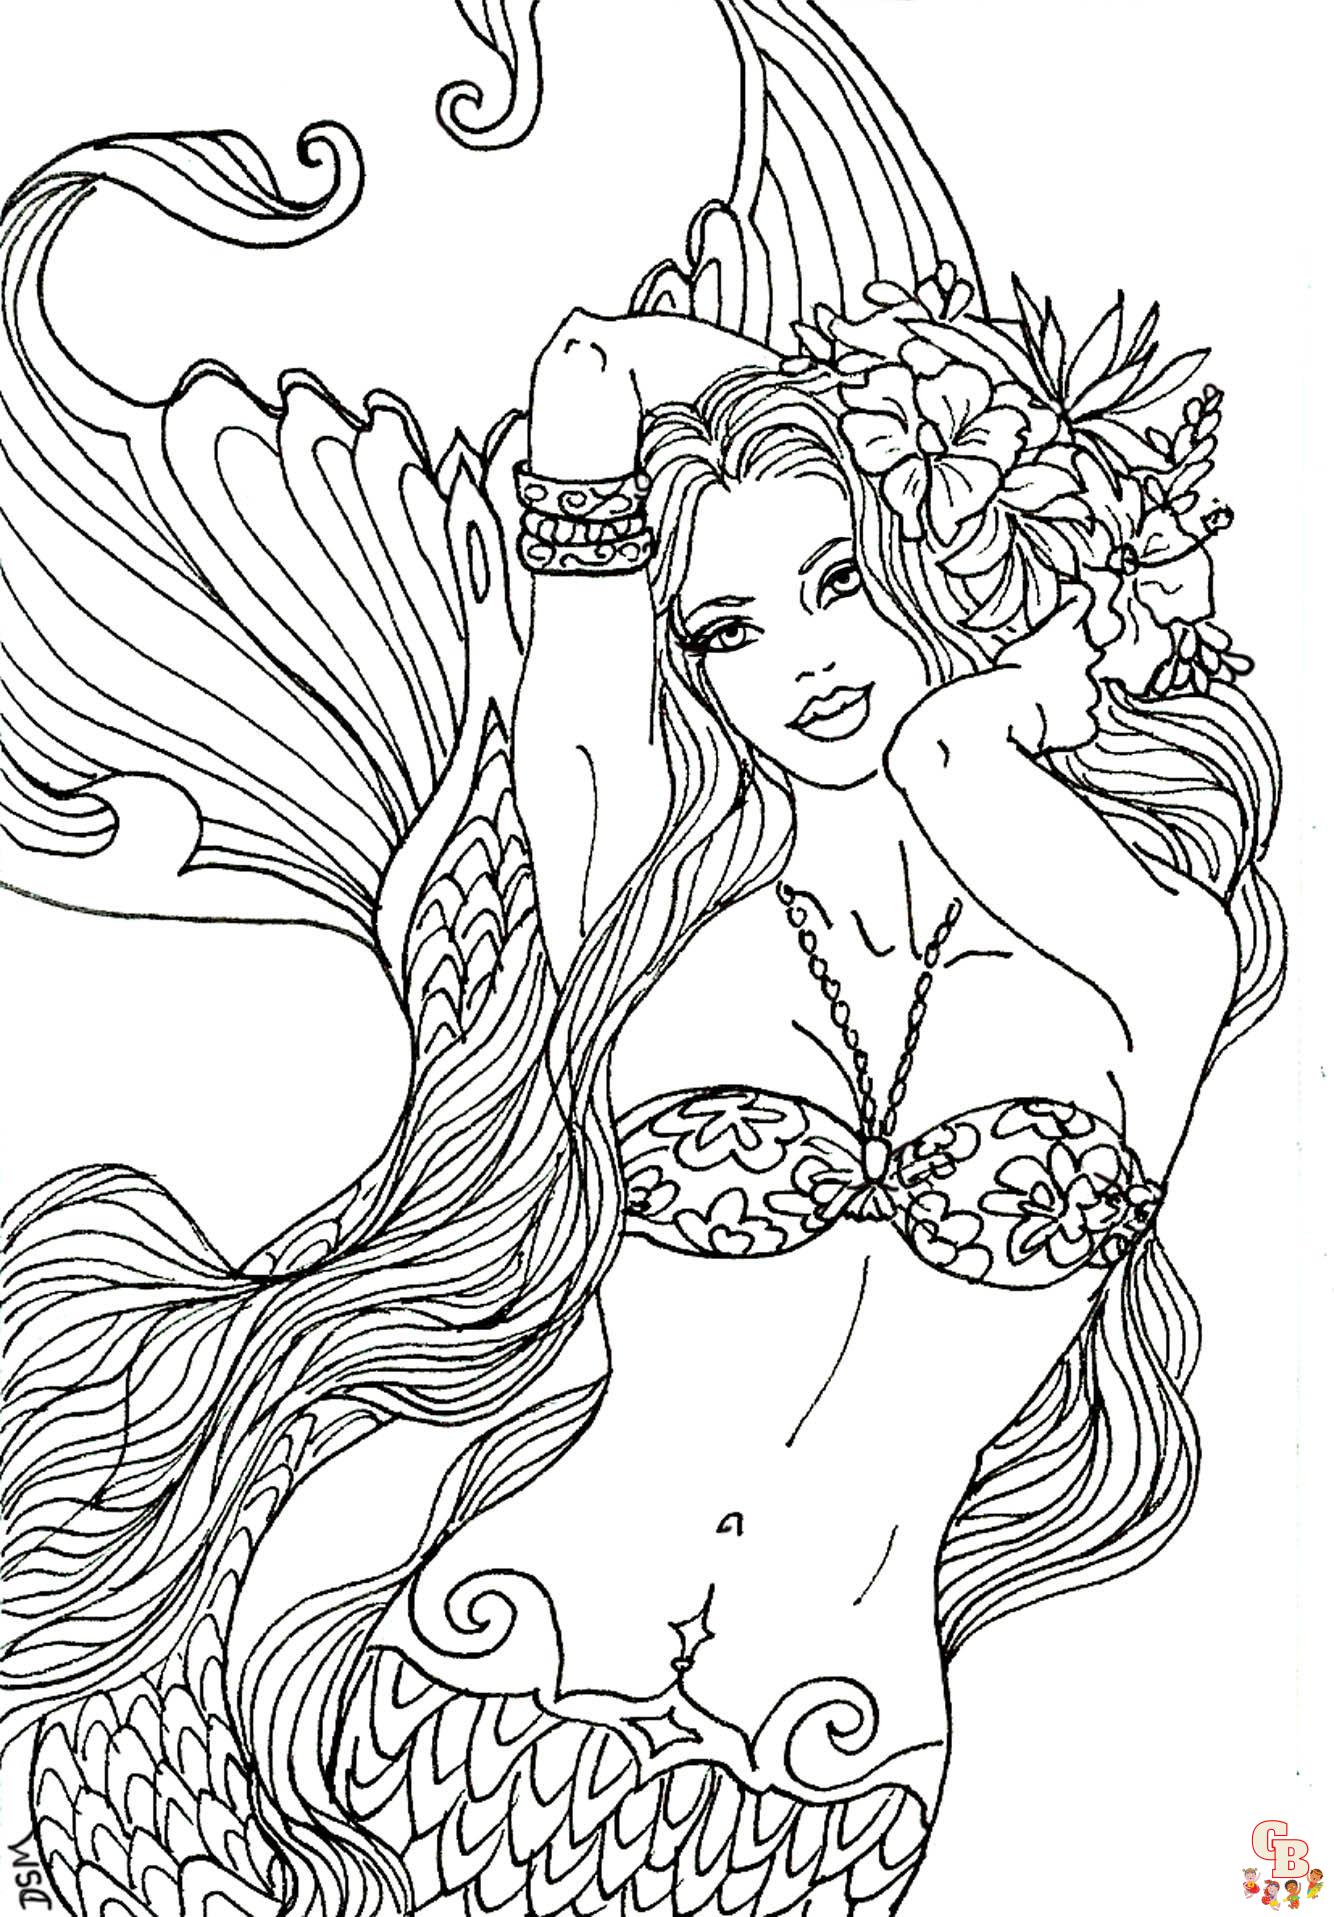 Realistic Mermaid Coloring Pages 10